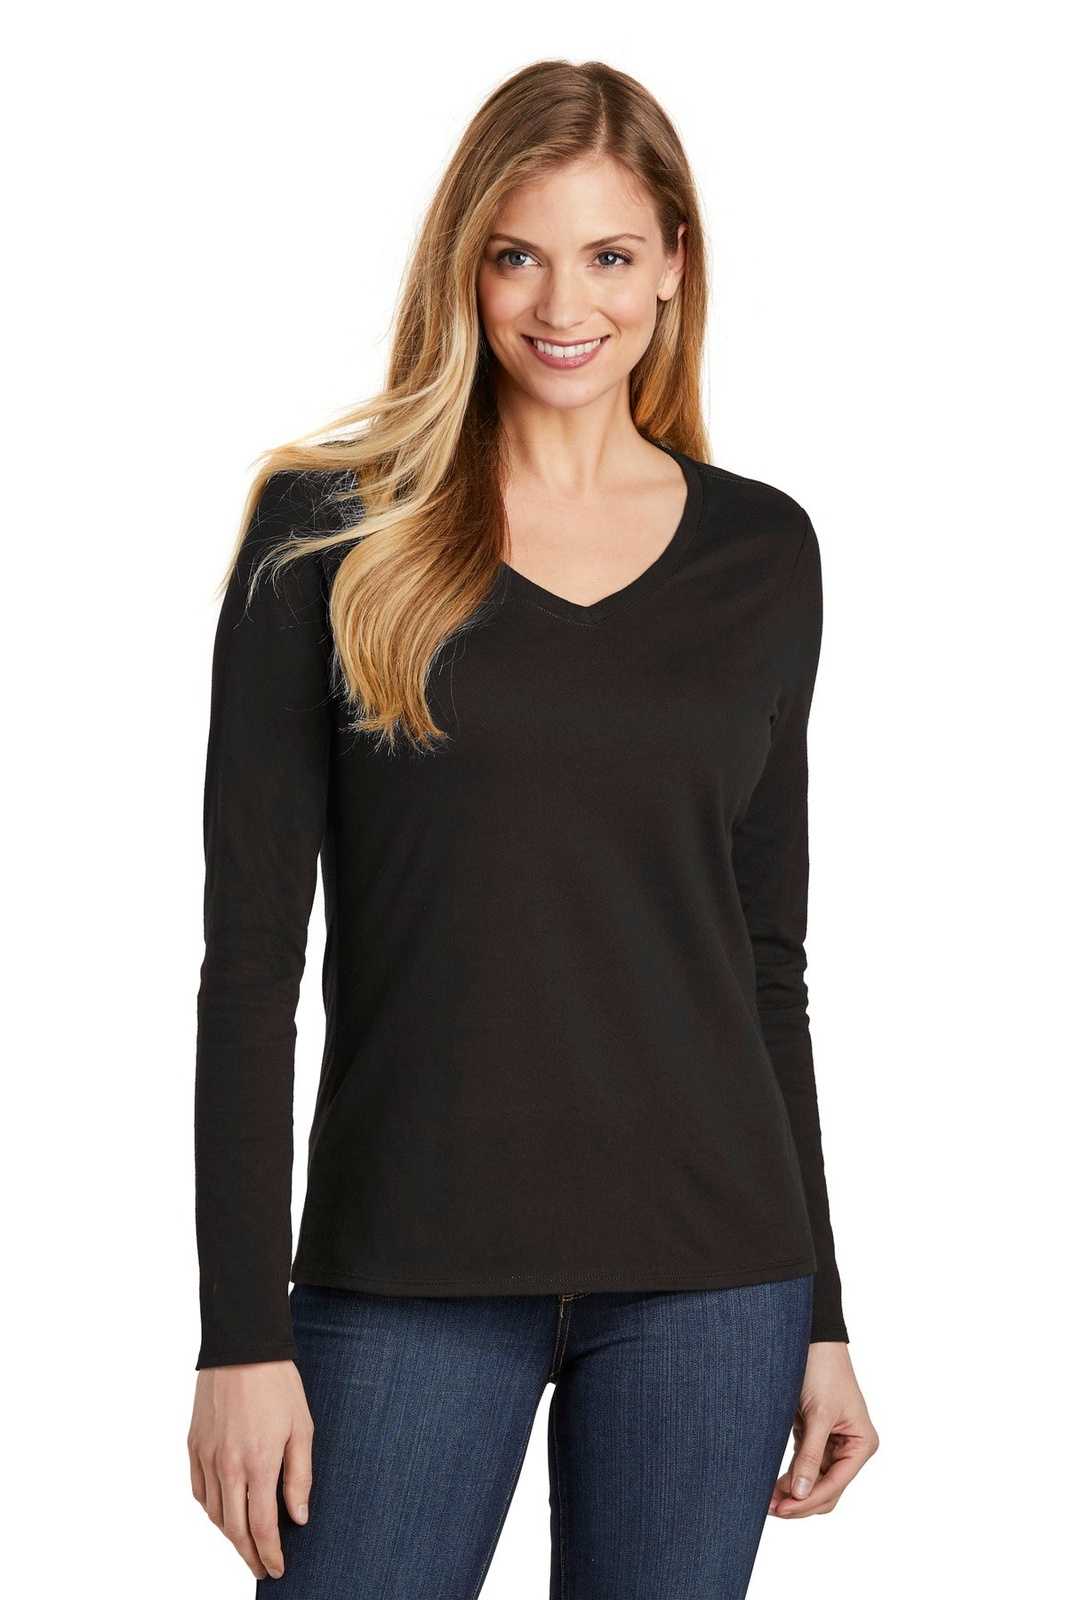 District DT6201 Women's Very Important Tee Long Sleeve V-Neck - Black - HIT a Double - 1